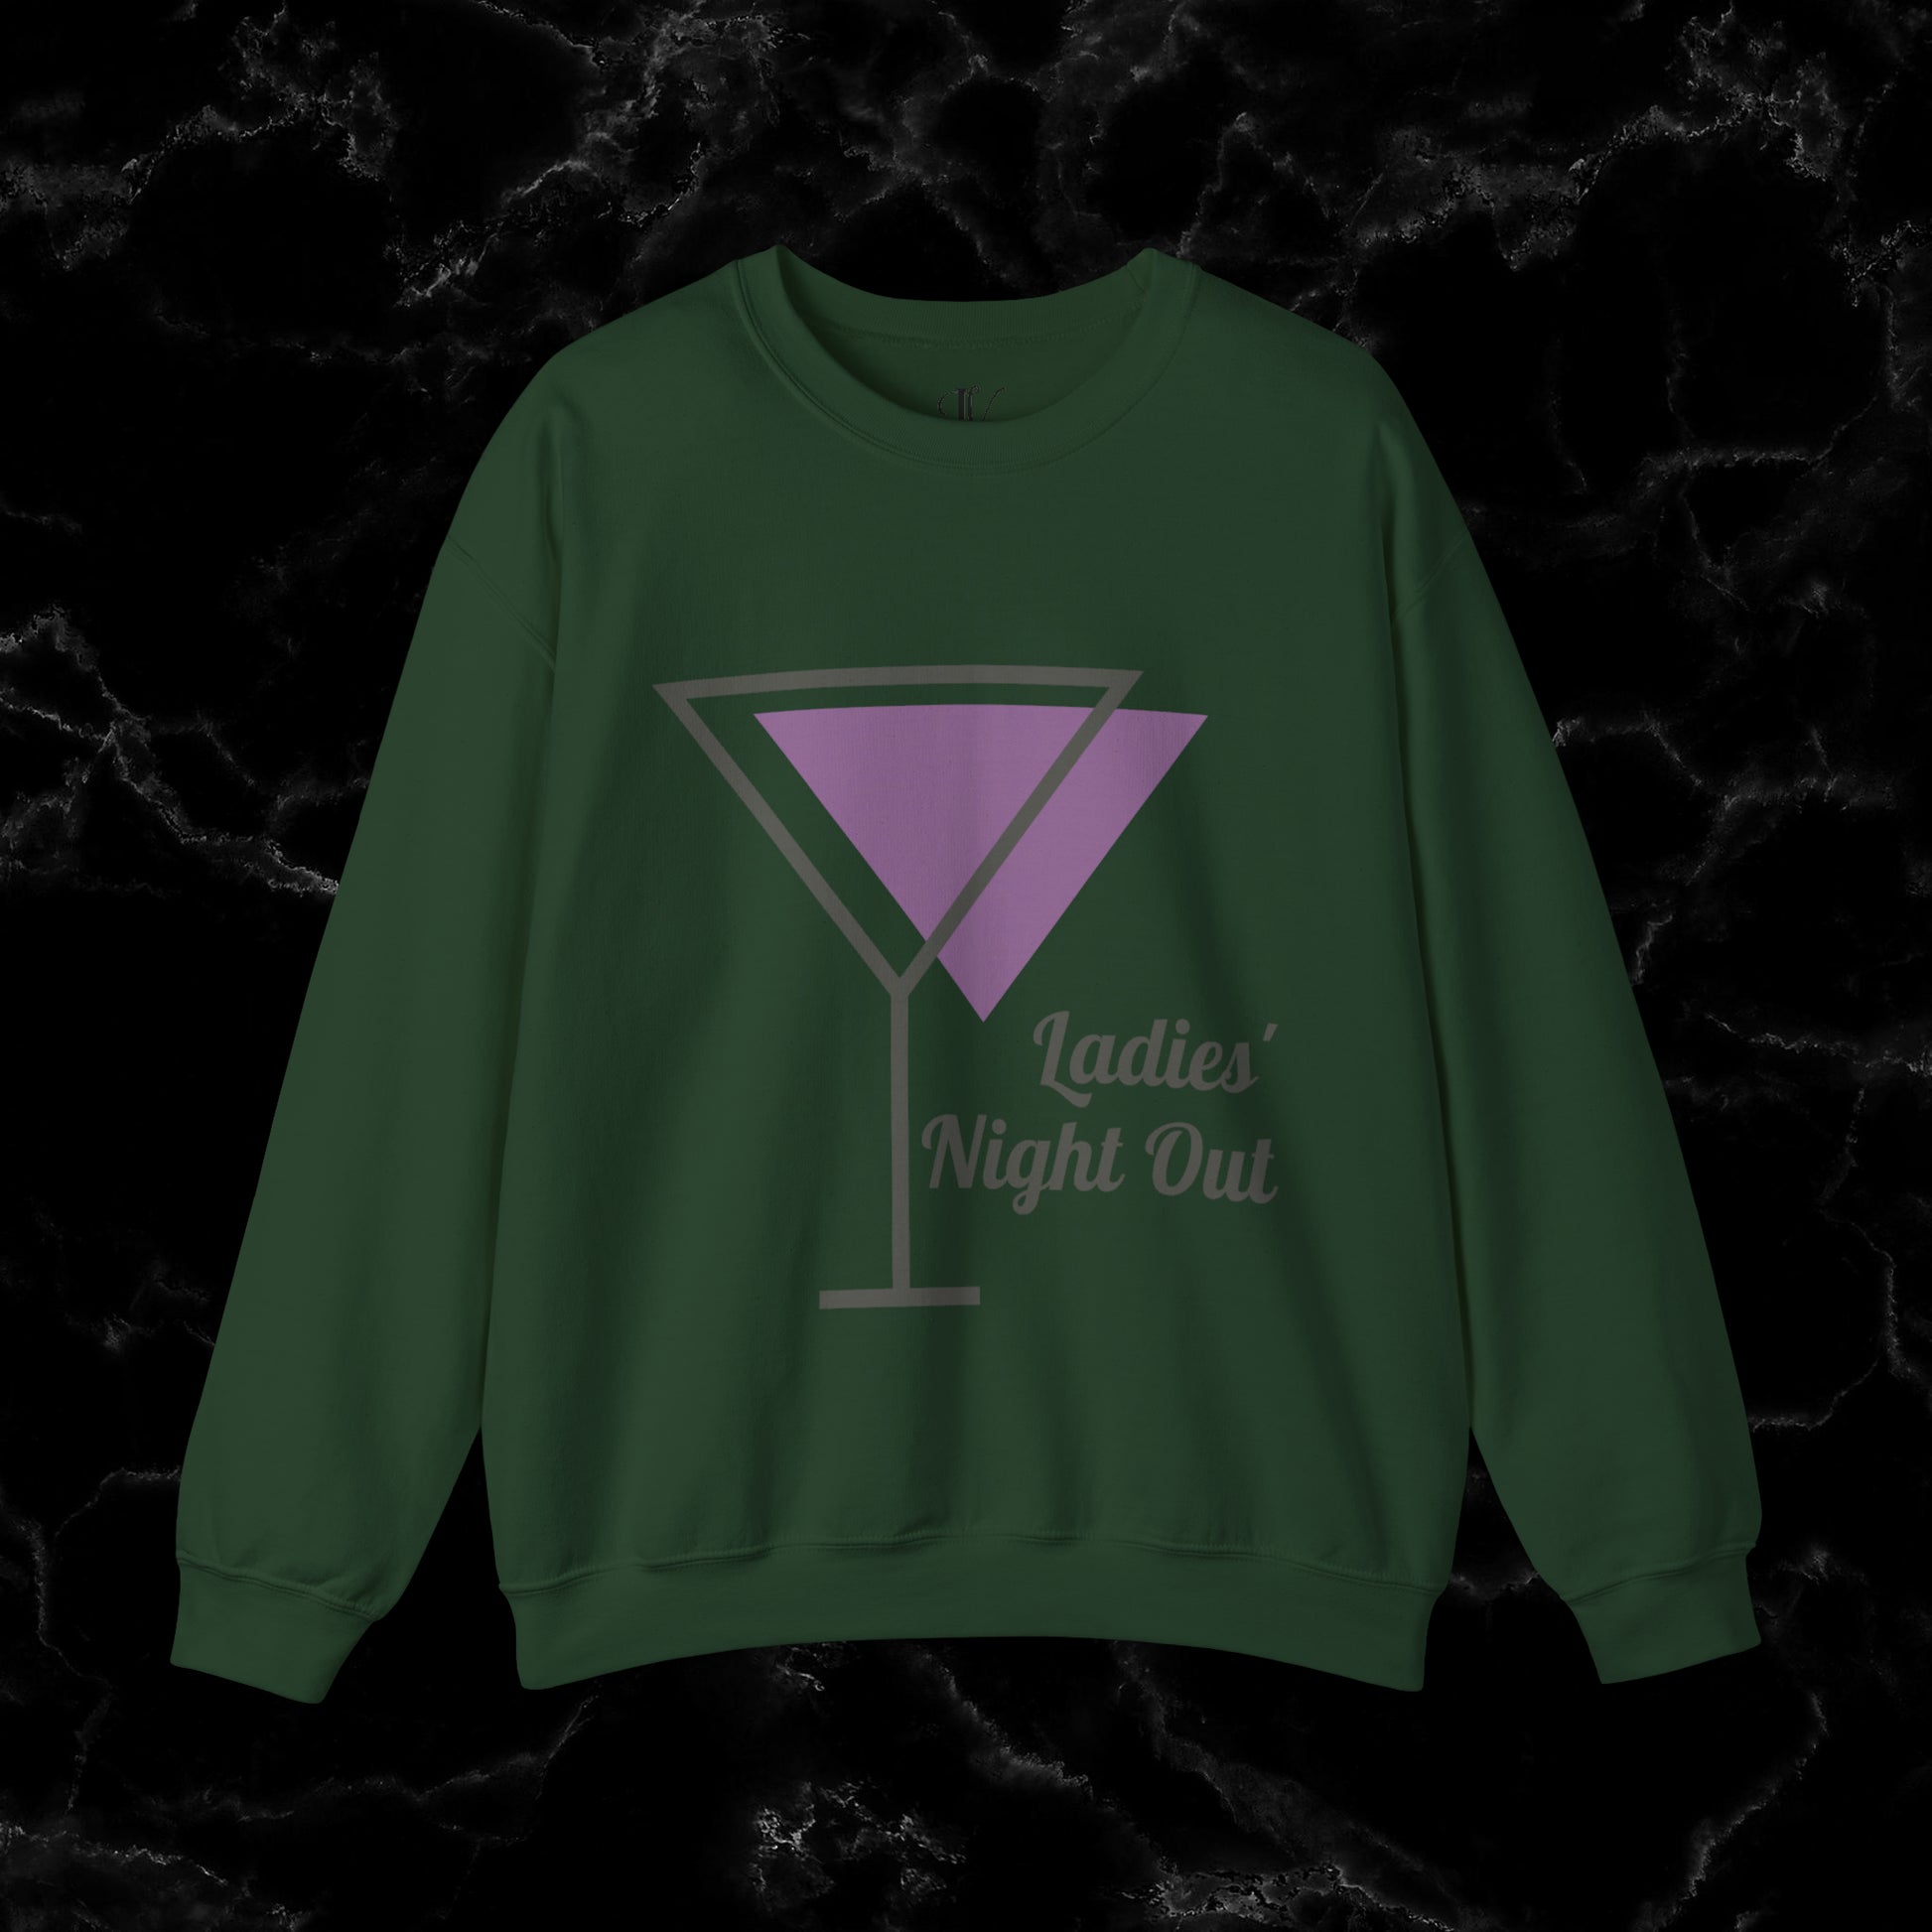 Ladies' Night Out - Dirty Martini Social Club Sweatshirt - Elevate Your Night Out with Style and Sass in this Chic and Comfortable Sweatshirt! Sweatshirt S Forest Green 